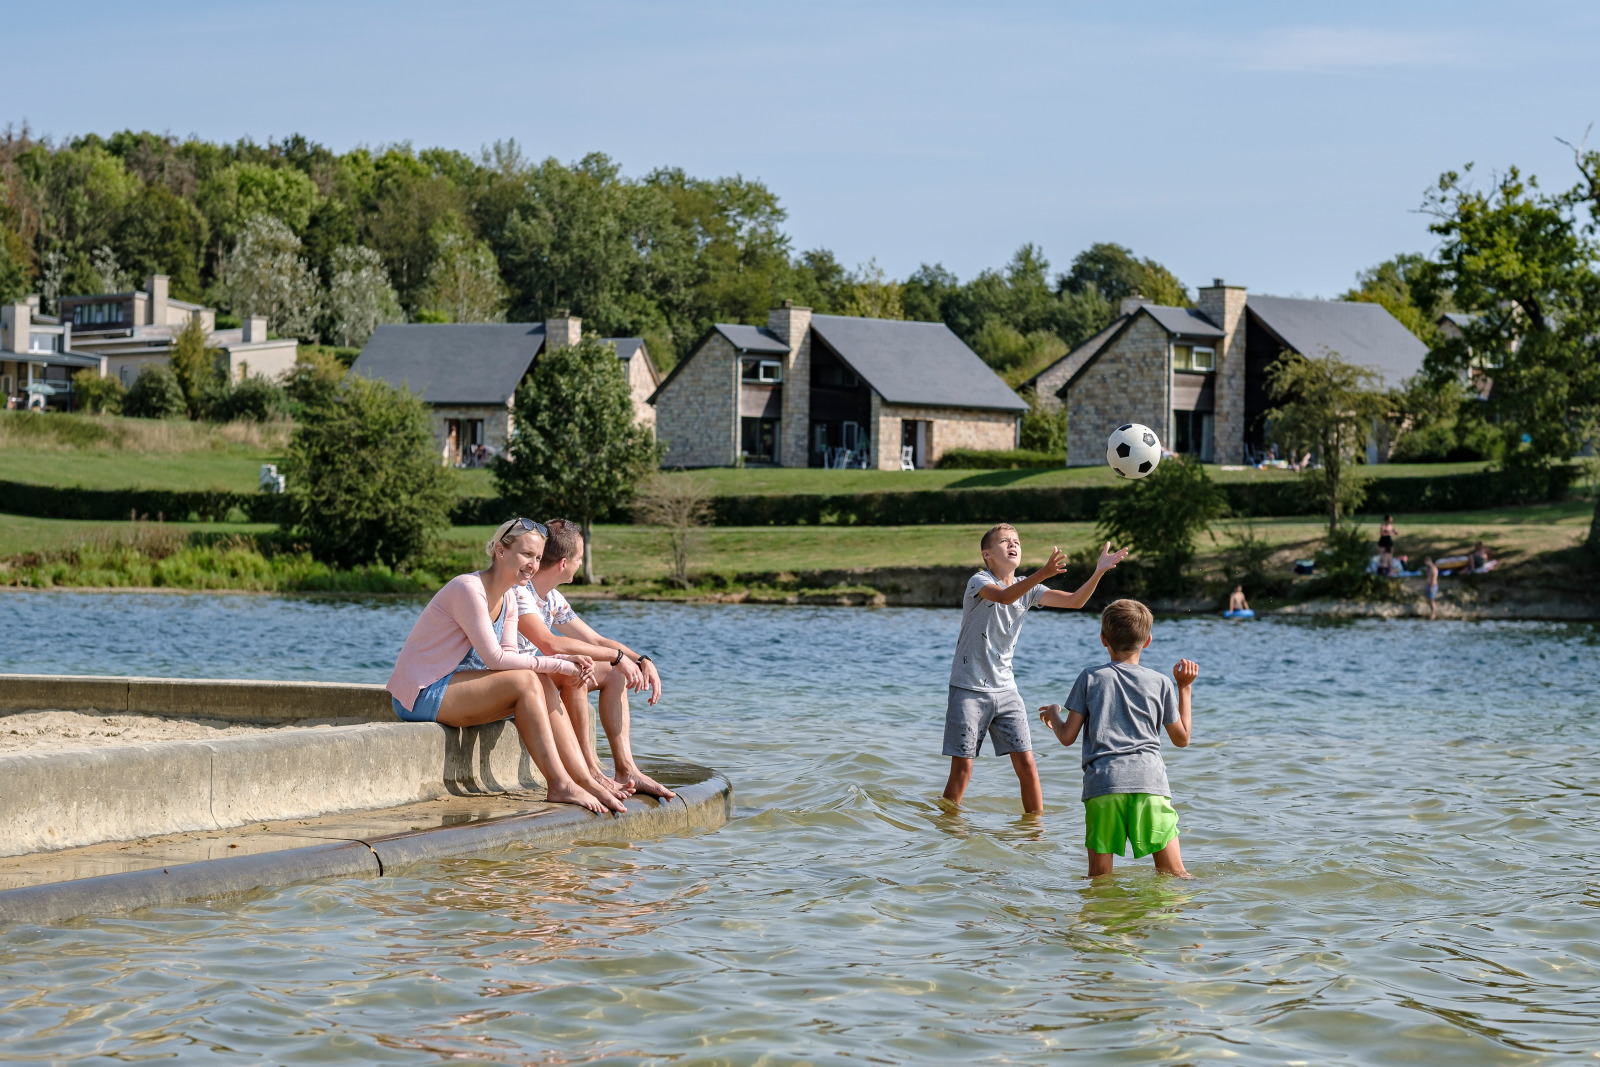  ​ 75 / 5 000 Résultats de traduction Résultat de traduction Family bathing in the lake with the holiday village in the backgrou